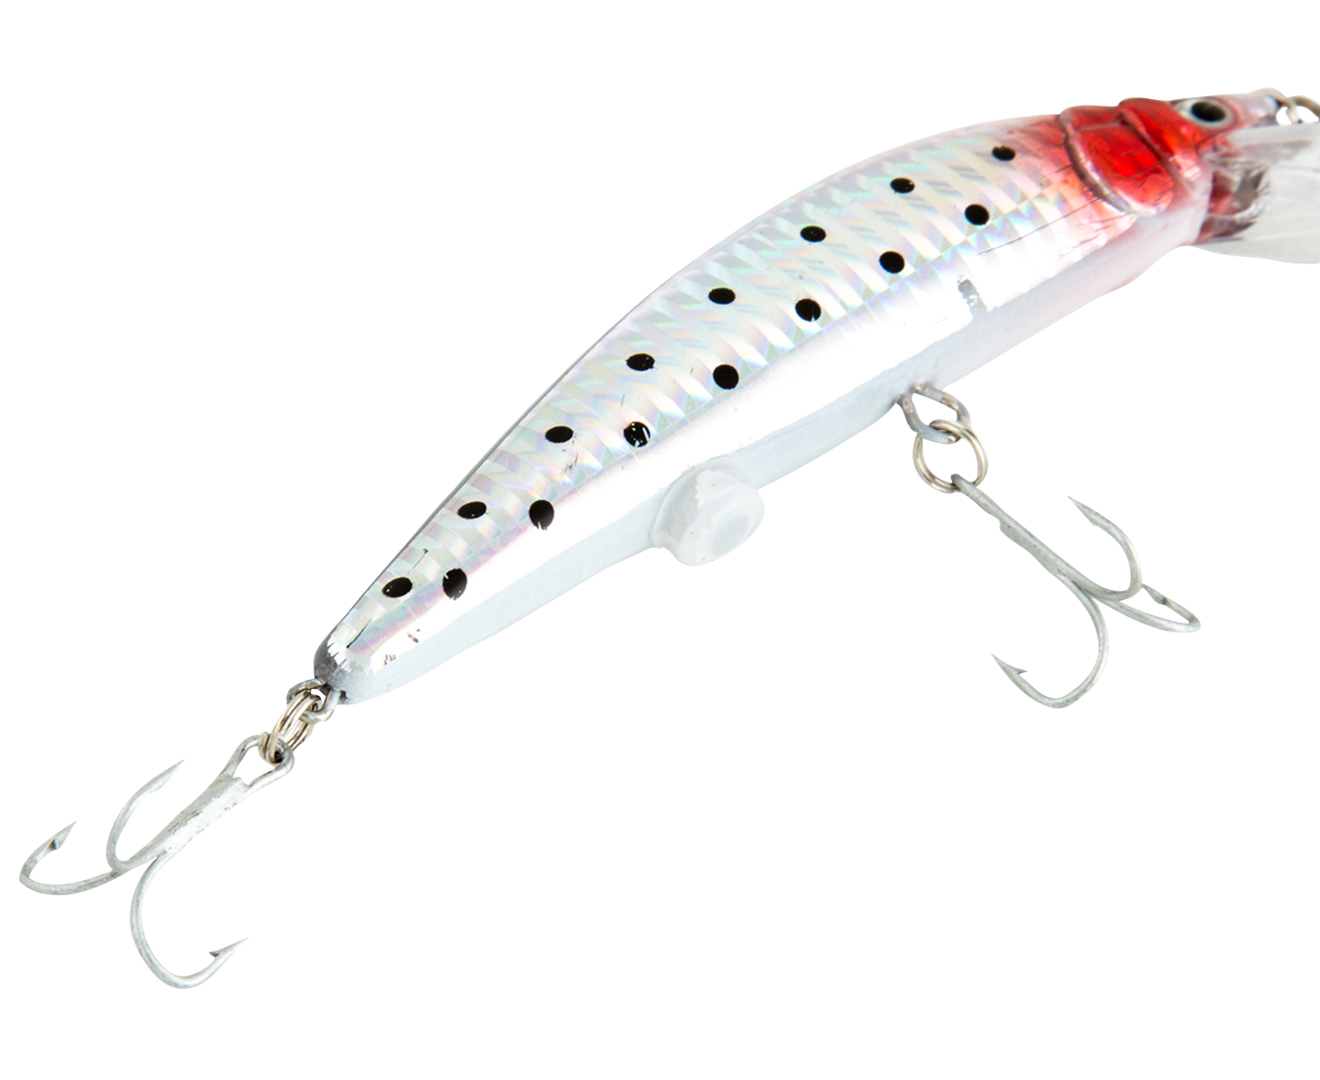 RECHARGEABLE TWITCHING FISH LURE